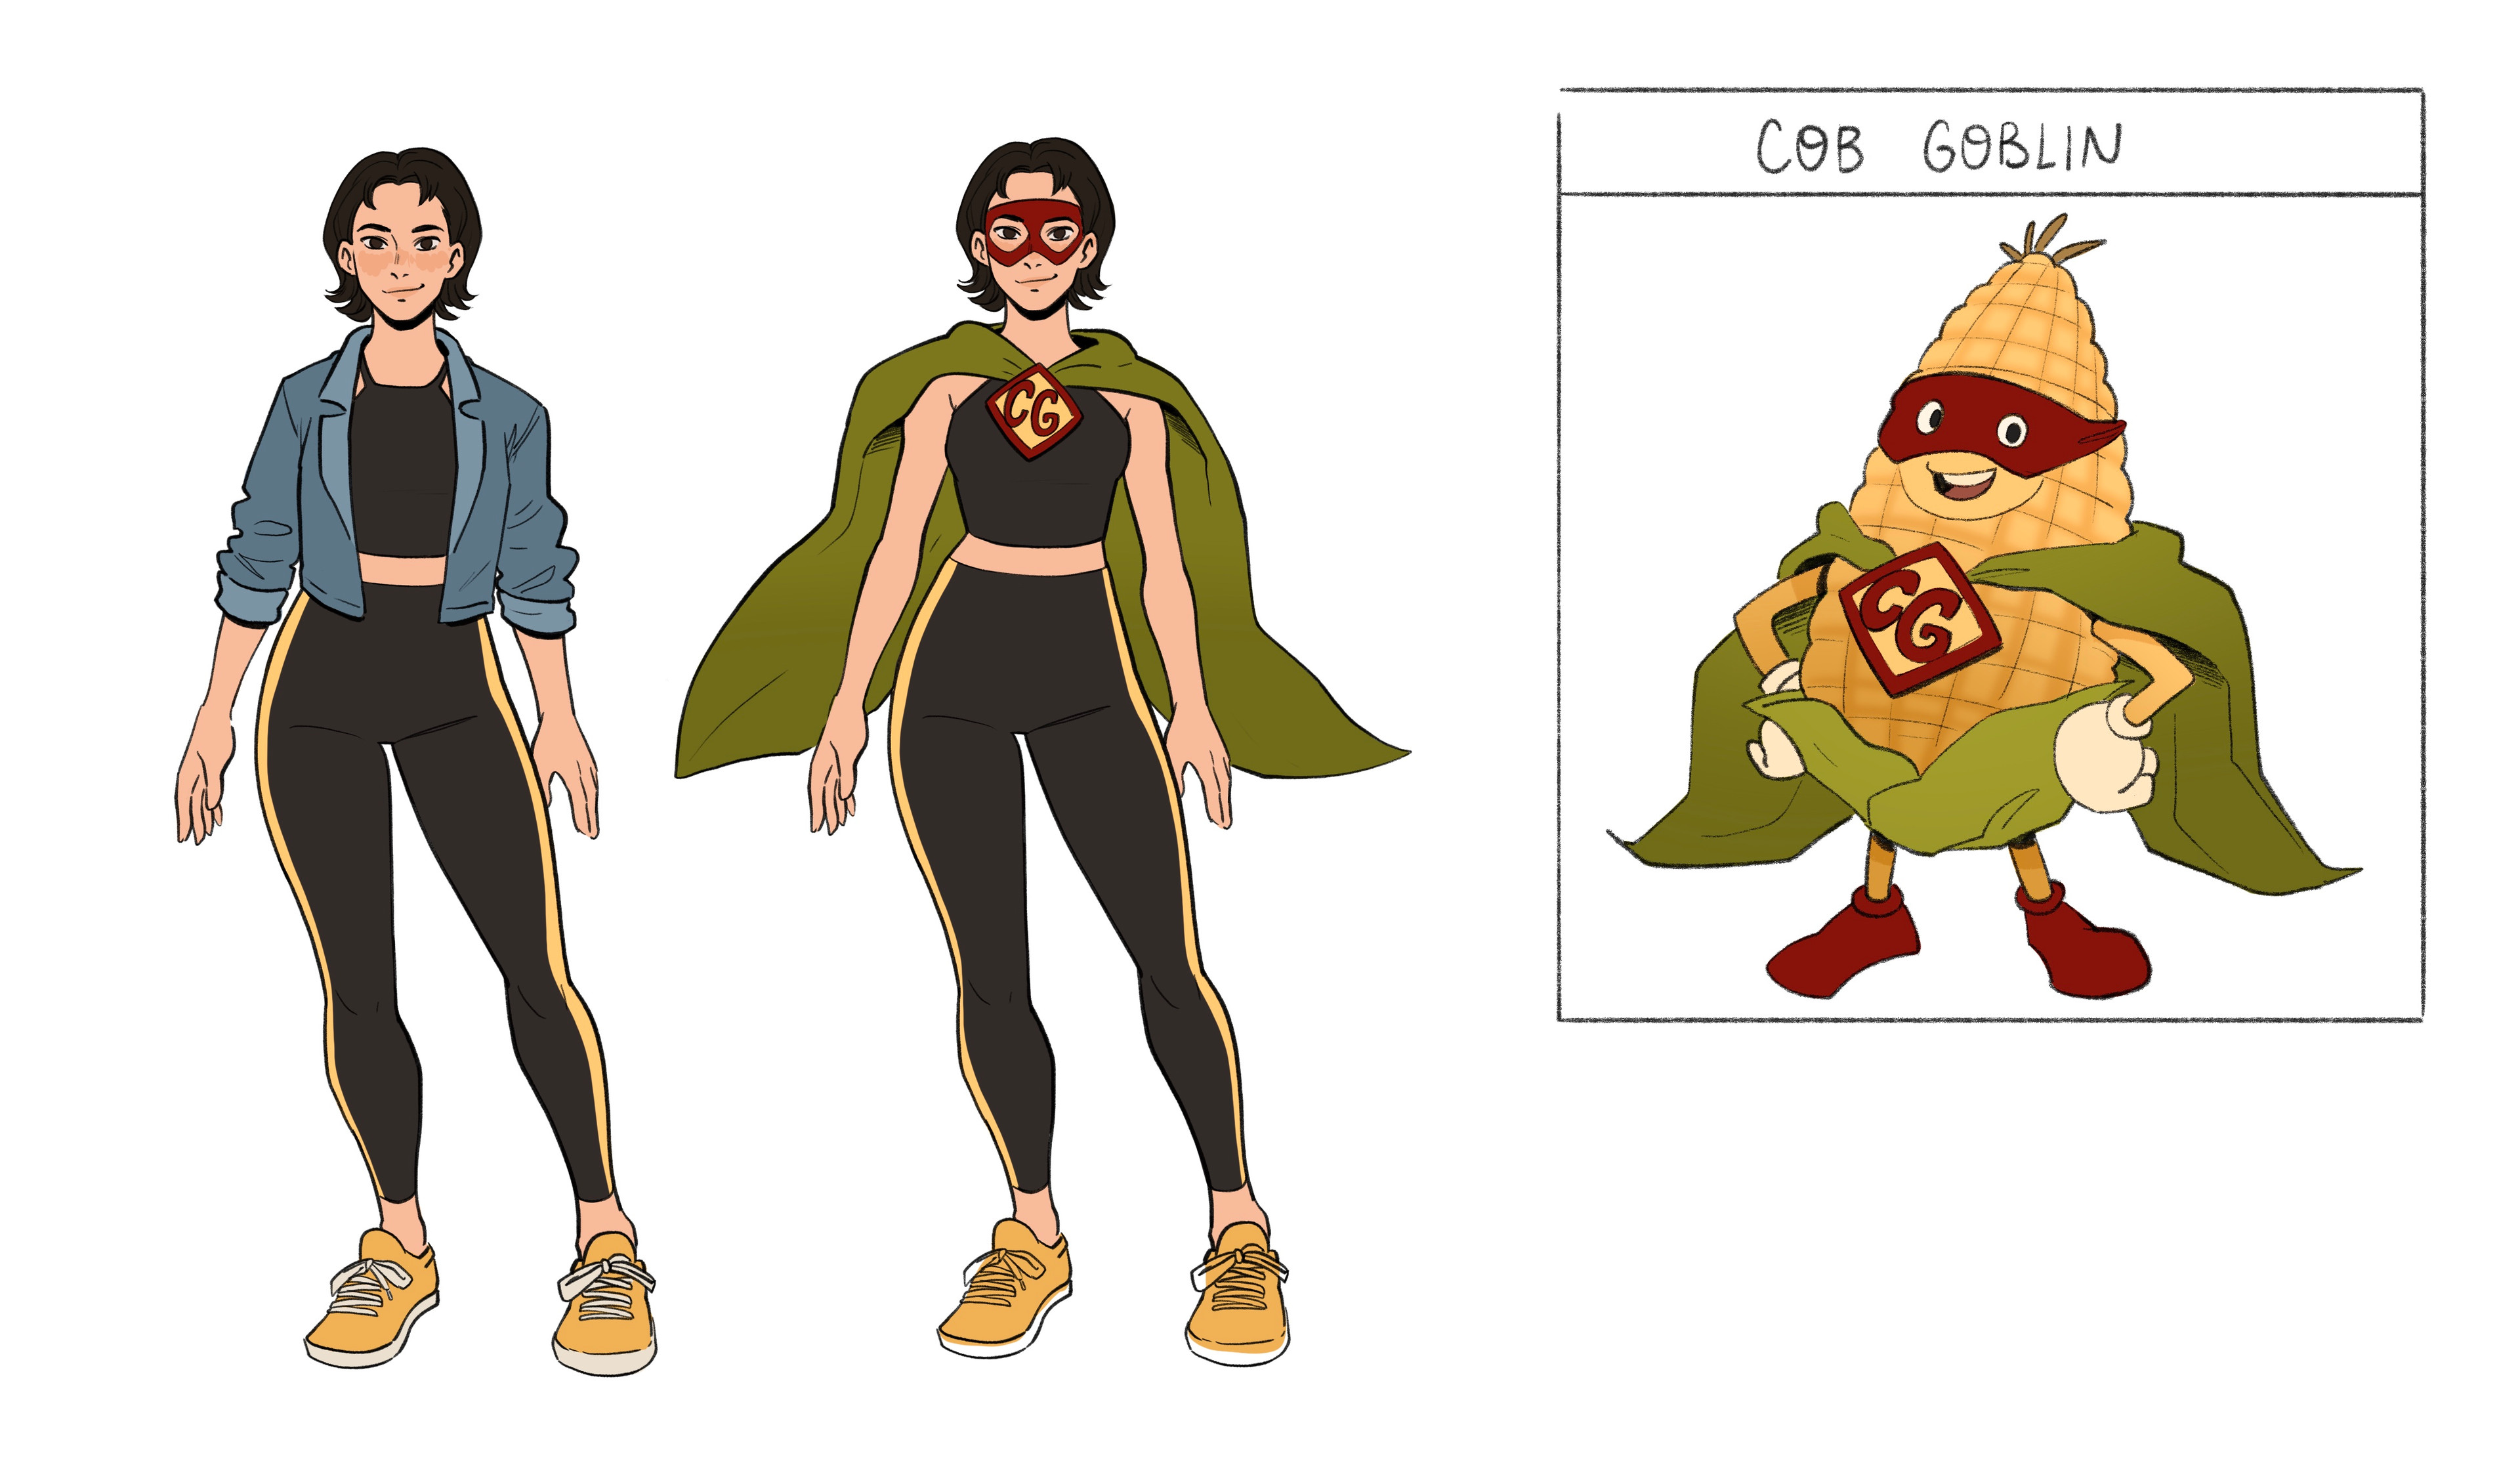 Lainie final civilian outfit + "disguised" outfit stolen/borrowed from Cob Goblin (stand mascot)